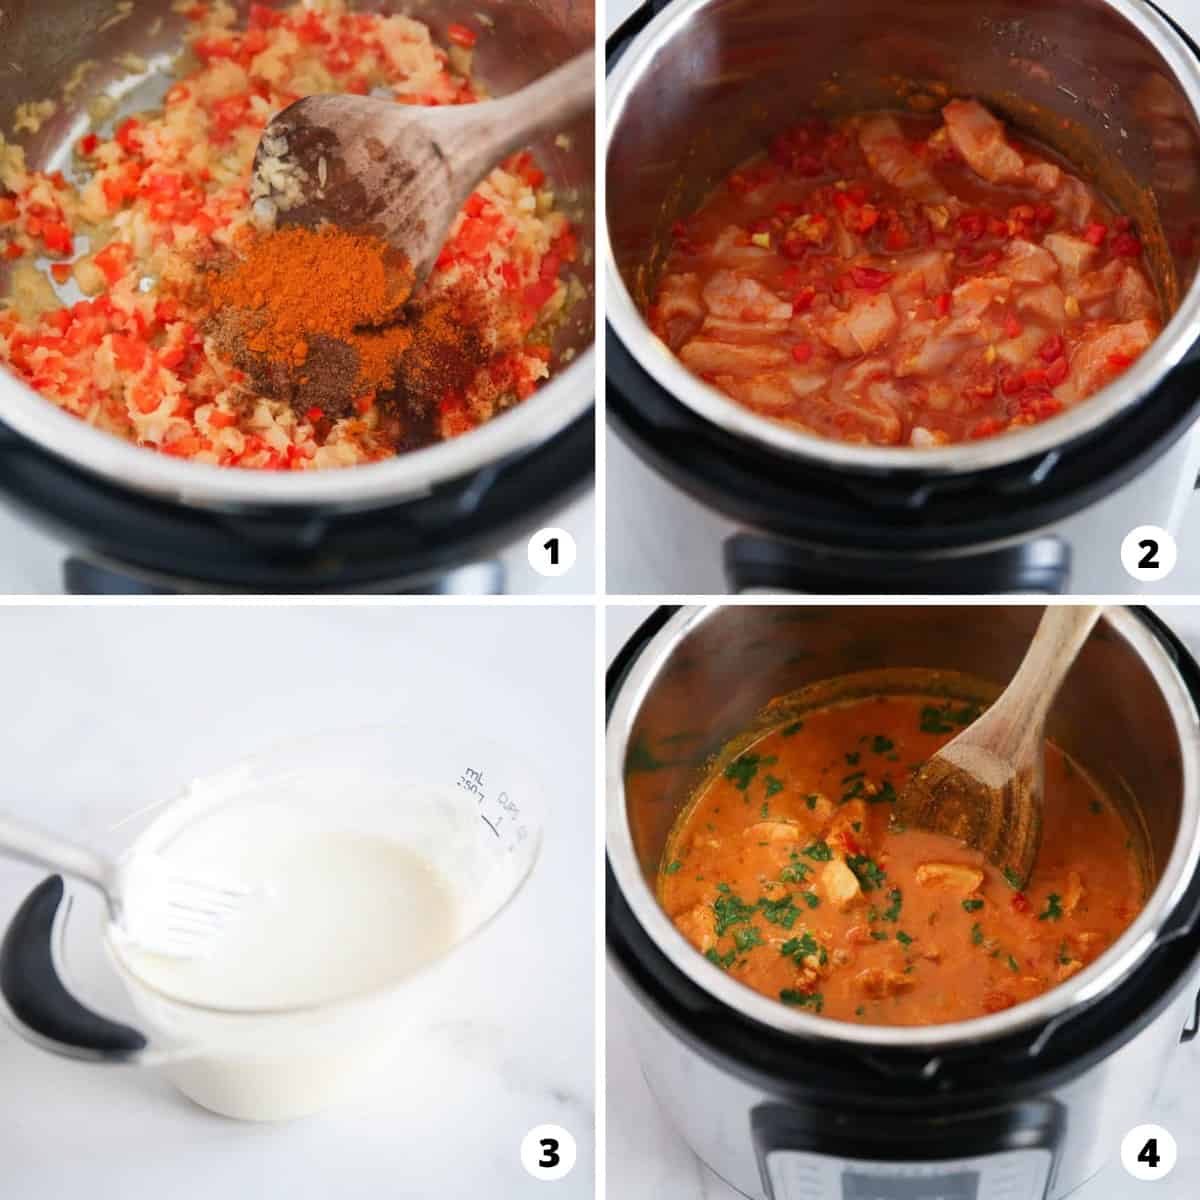 Photos showing step by step how to make Instant Pot butter chicken.